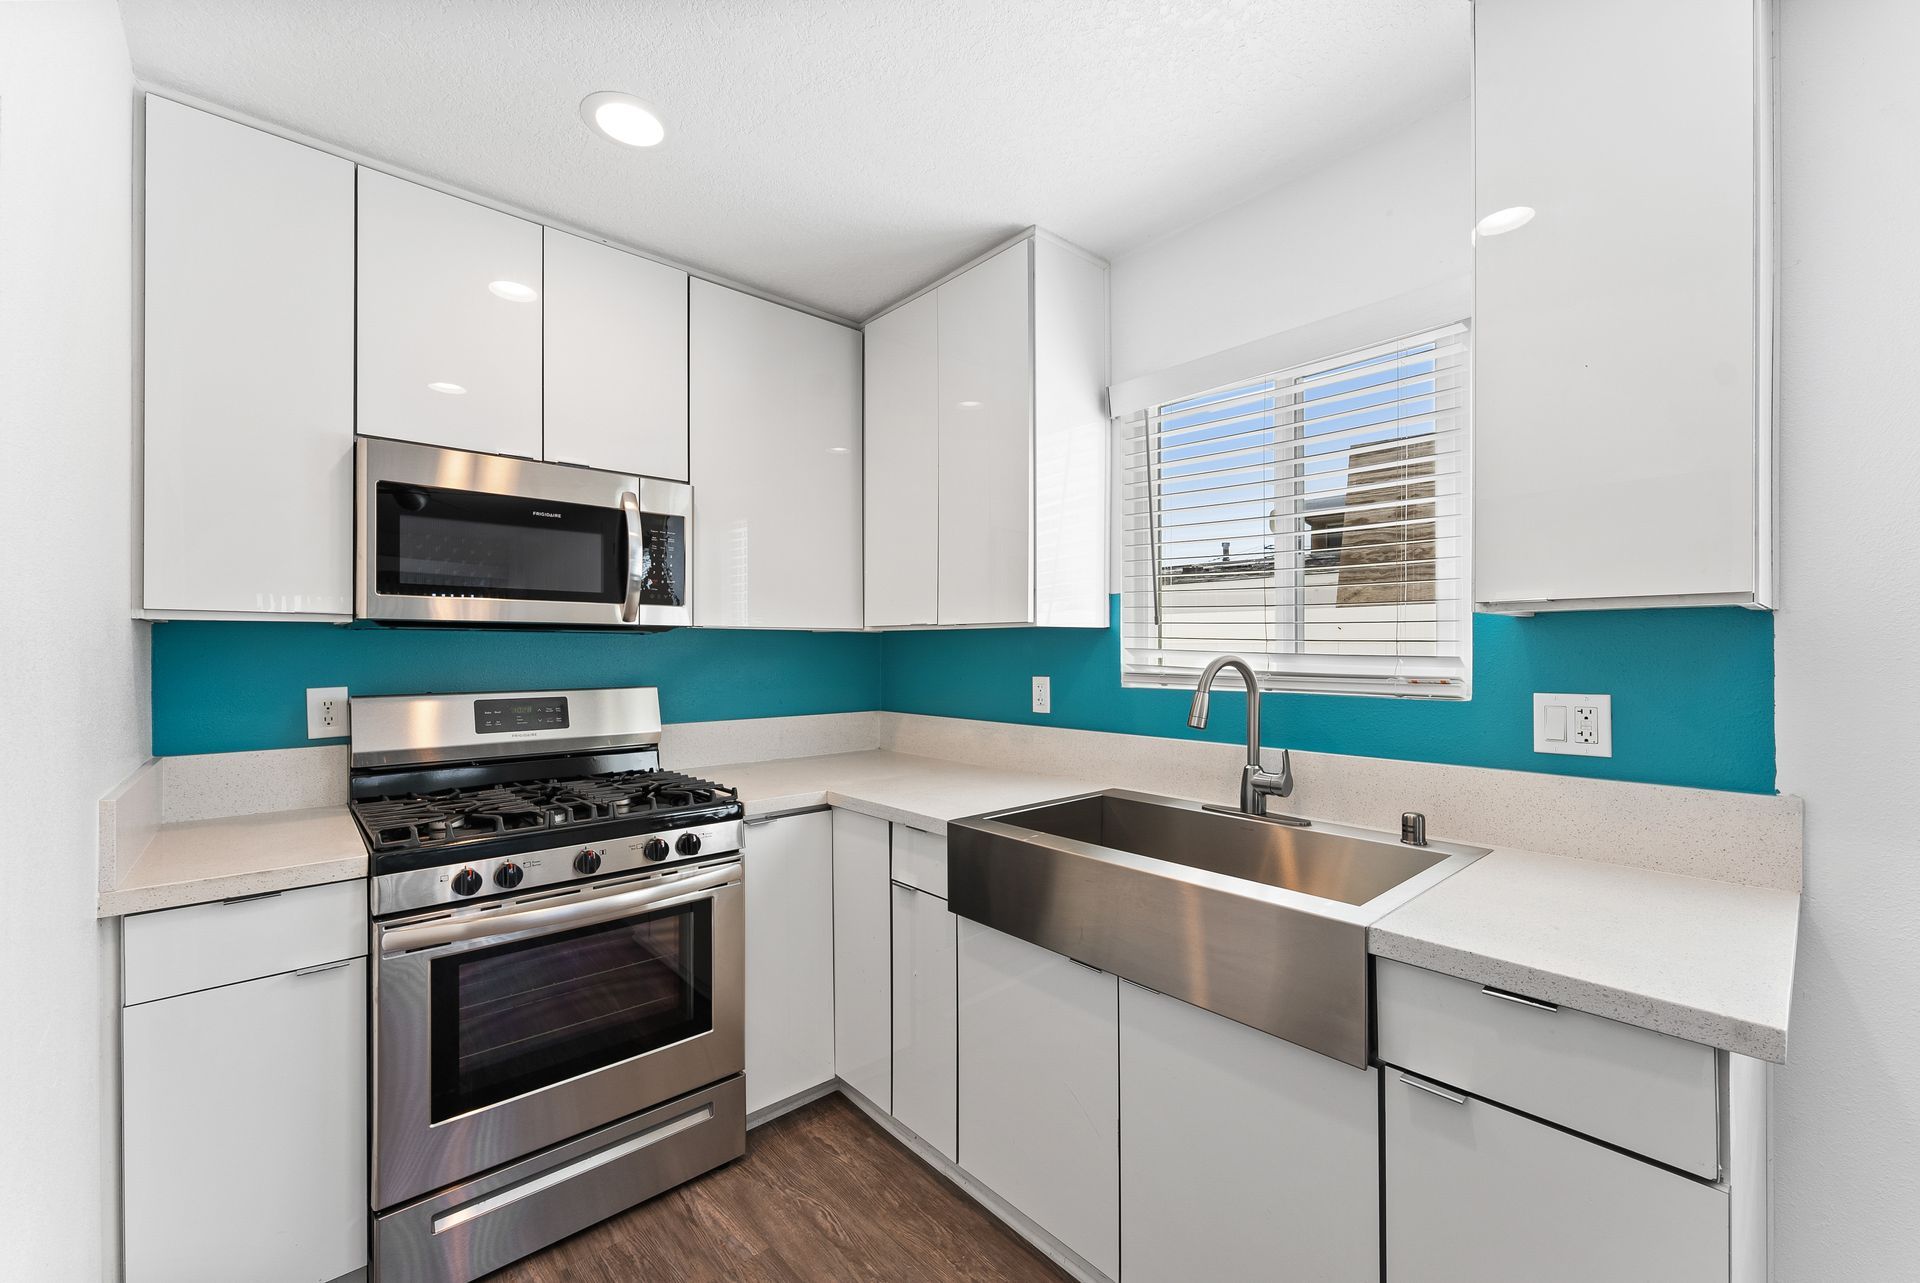 Sliding Photo Gallery Displaying Apartment Features- Kitchen with Blue Walls, white counters and cabinets, steel stove, and large steel sink